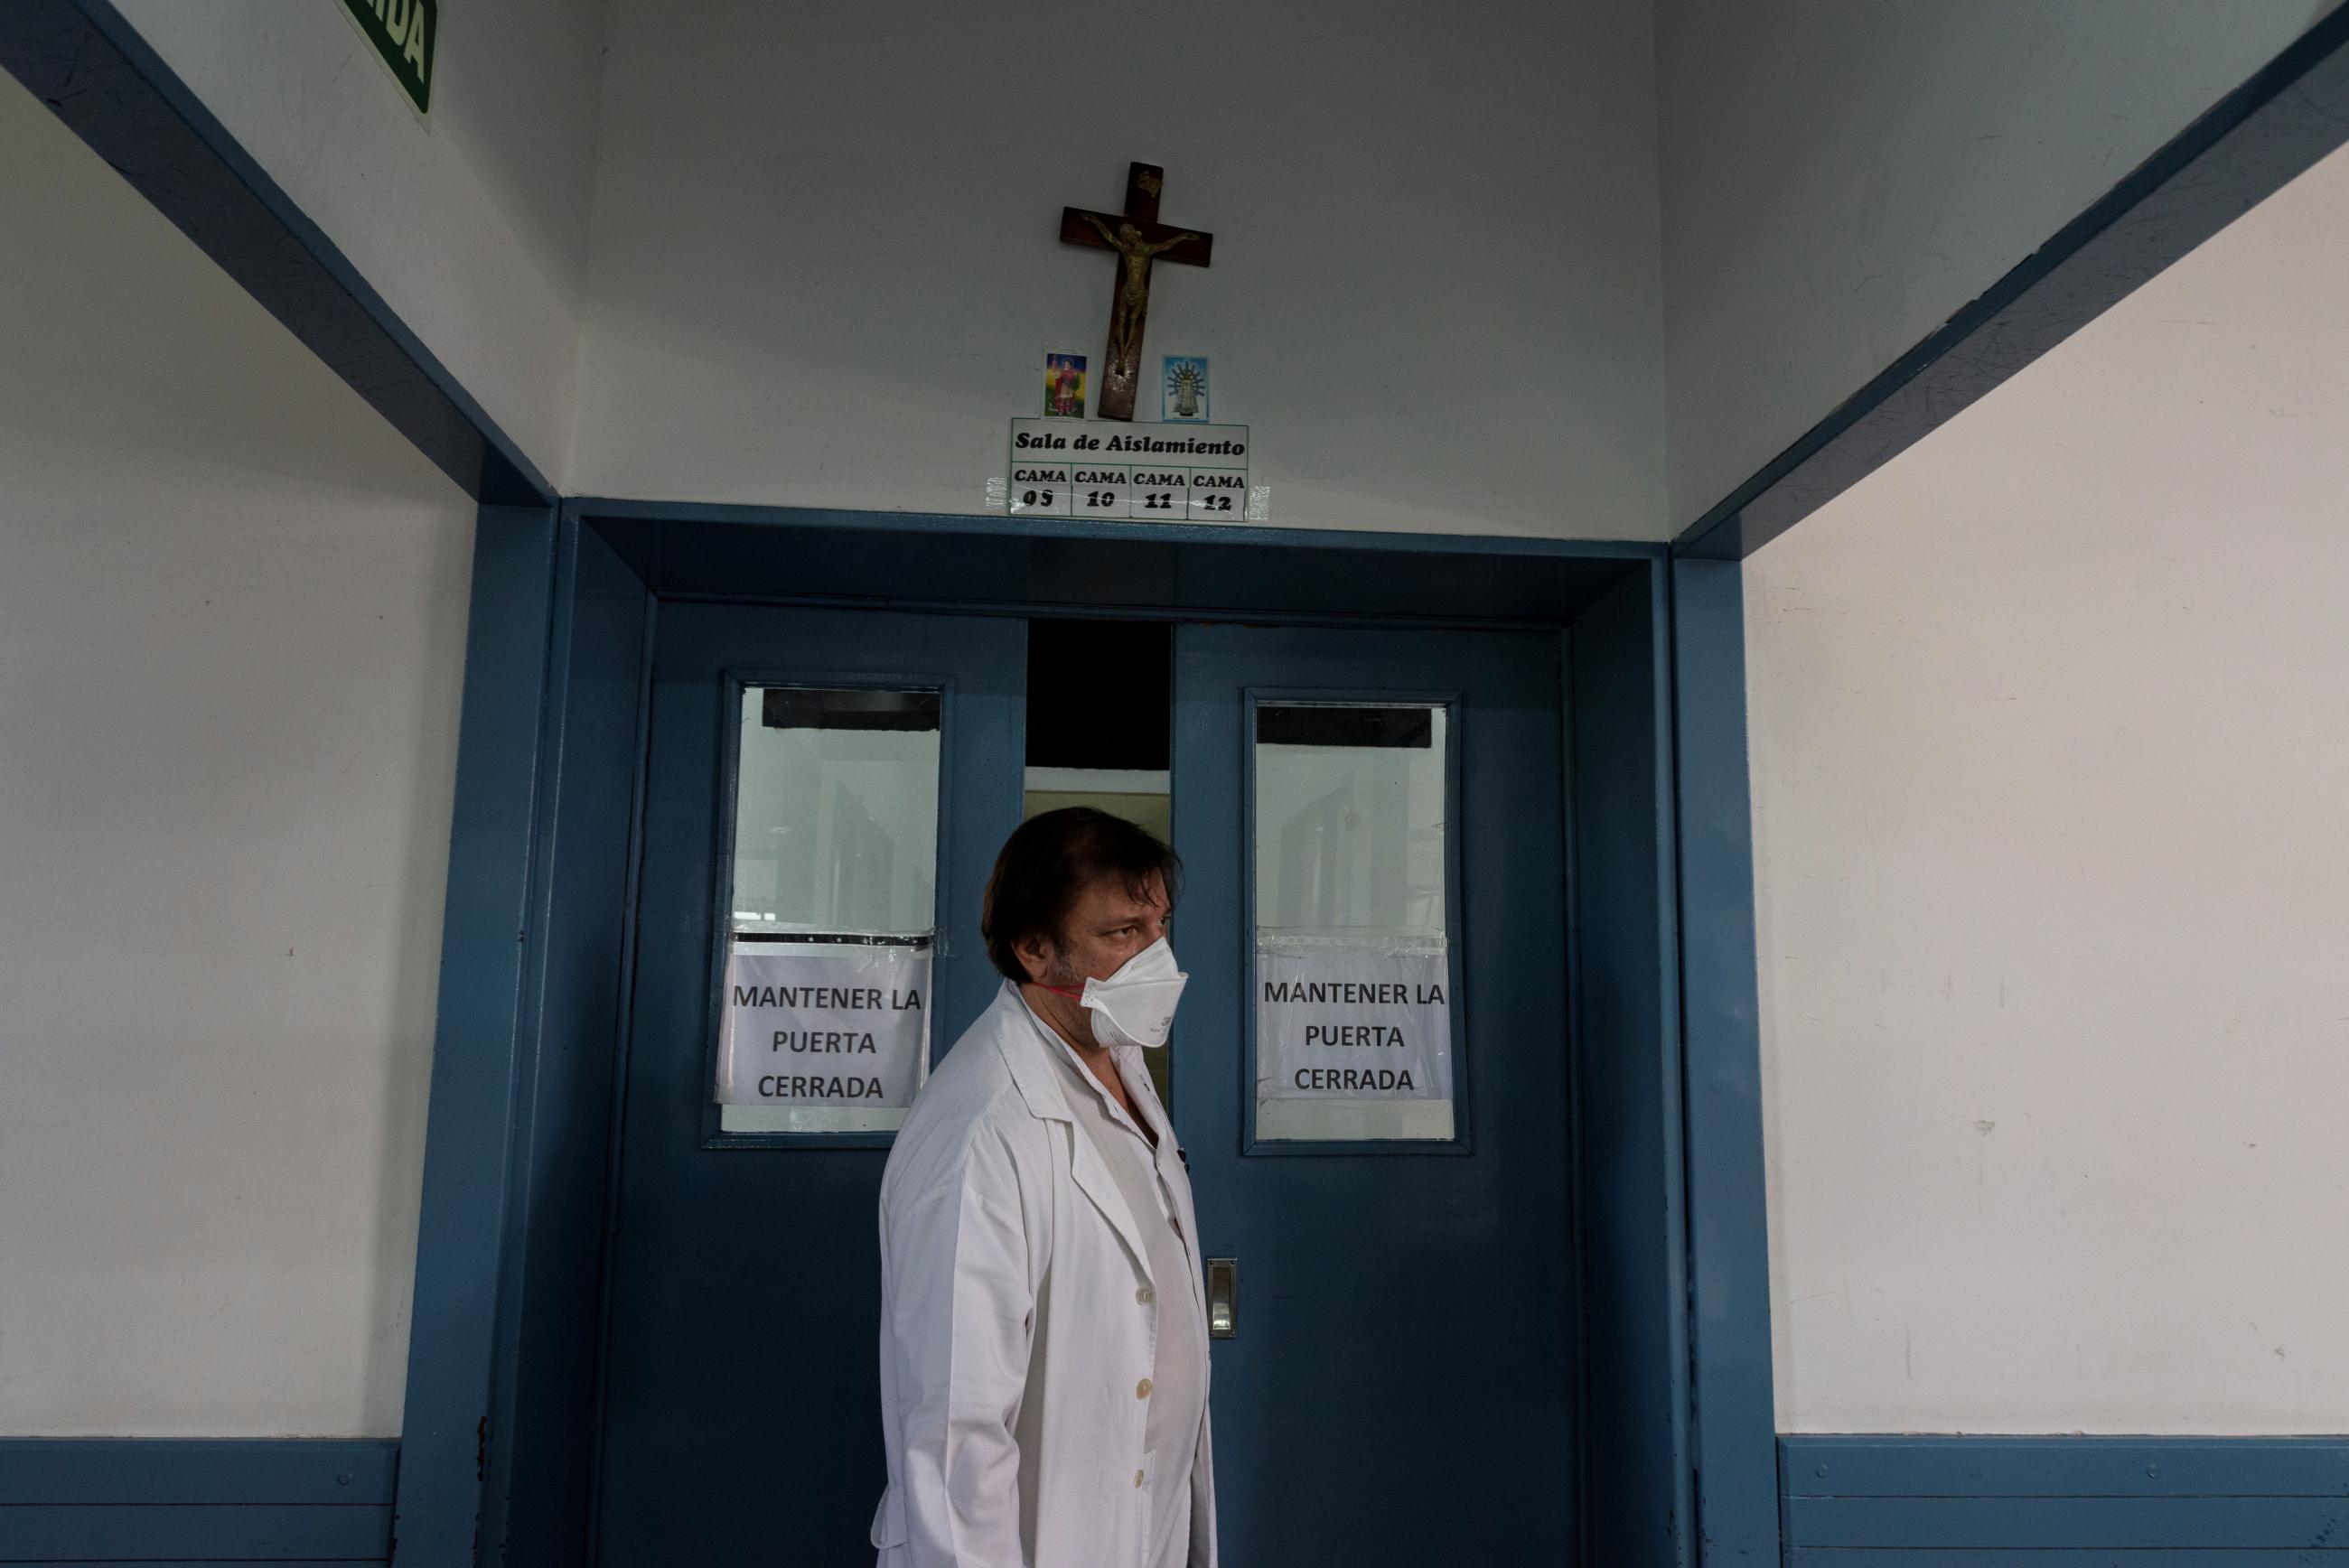 Physician Luis Alberto De Carolis, an adult man with dark hair wearing a white lab coat and surgical face mask is photographed standing between two dark teal hospital doors.